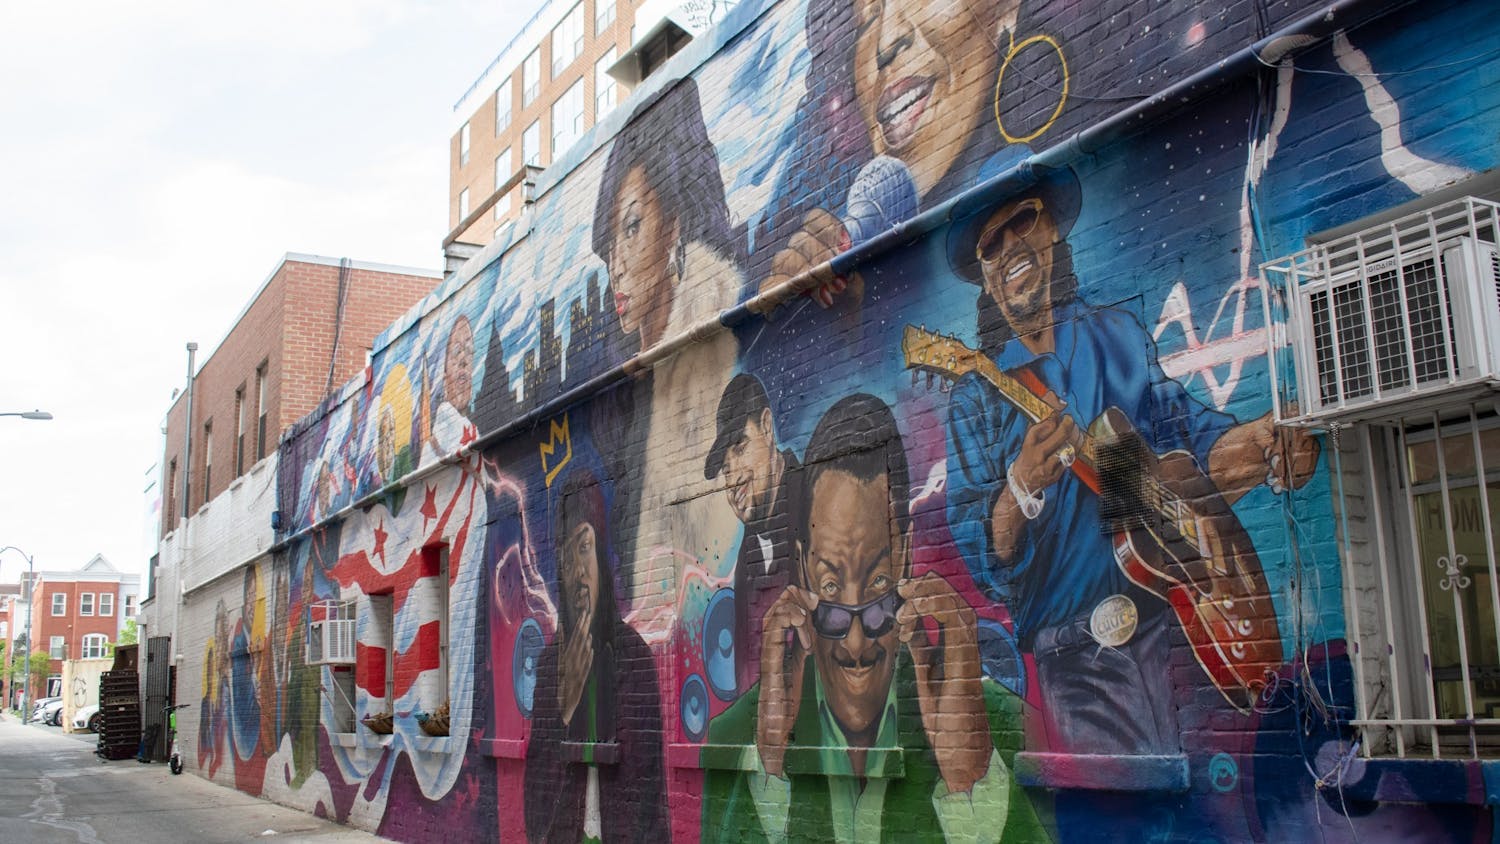 Organization MuralsDC helps artists paint the city’s history and future